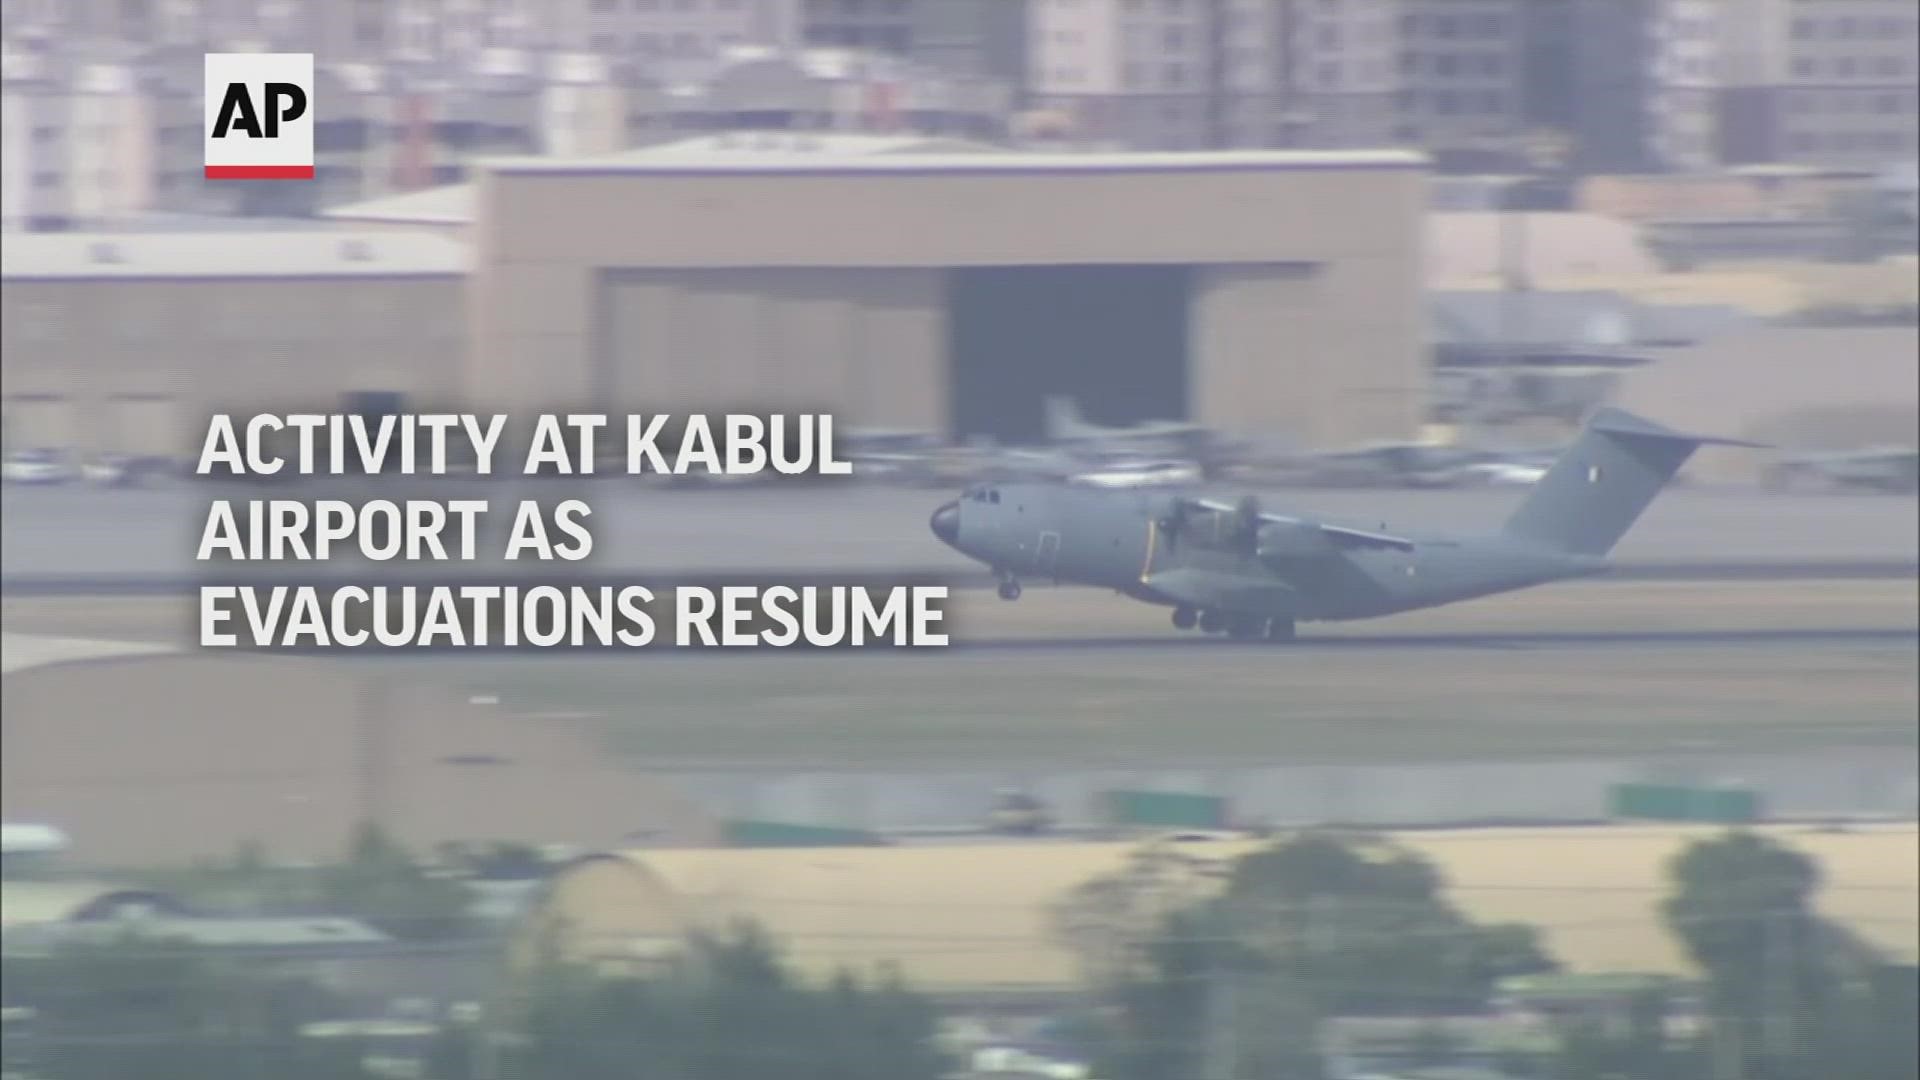 Evacuations from Afghanistan continued at Kabul airport on Saturday.